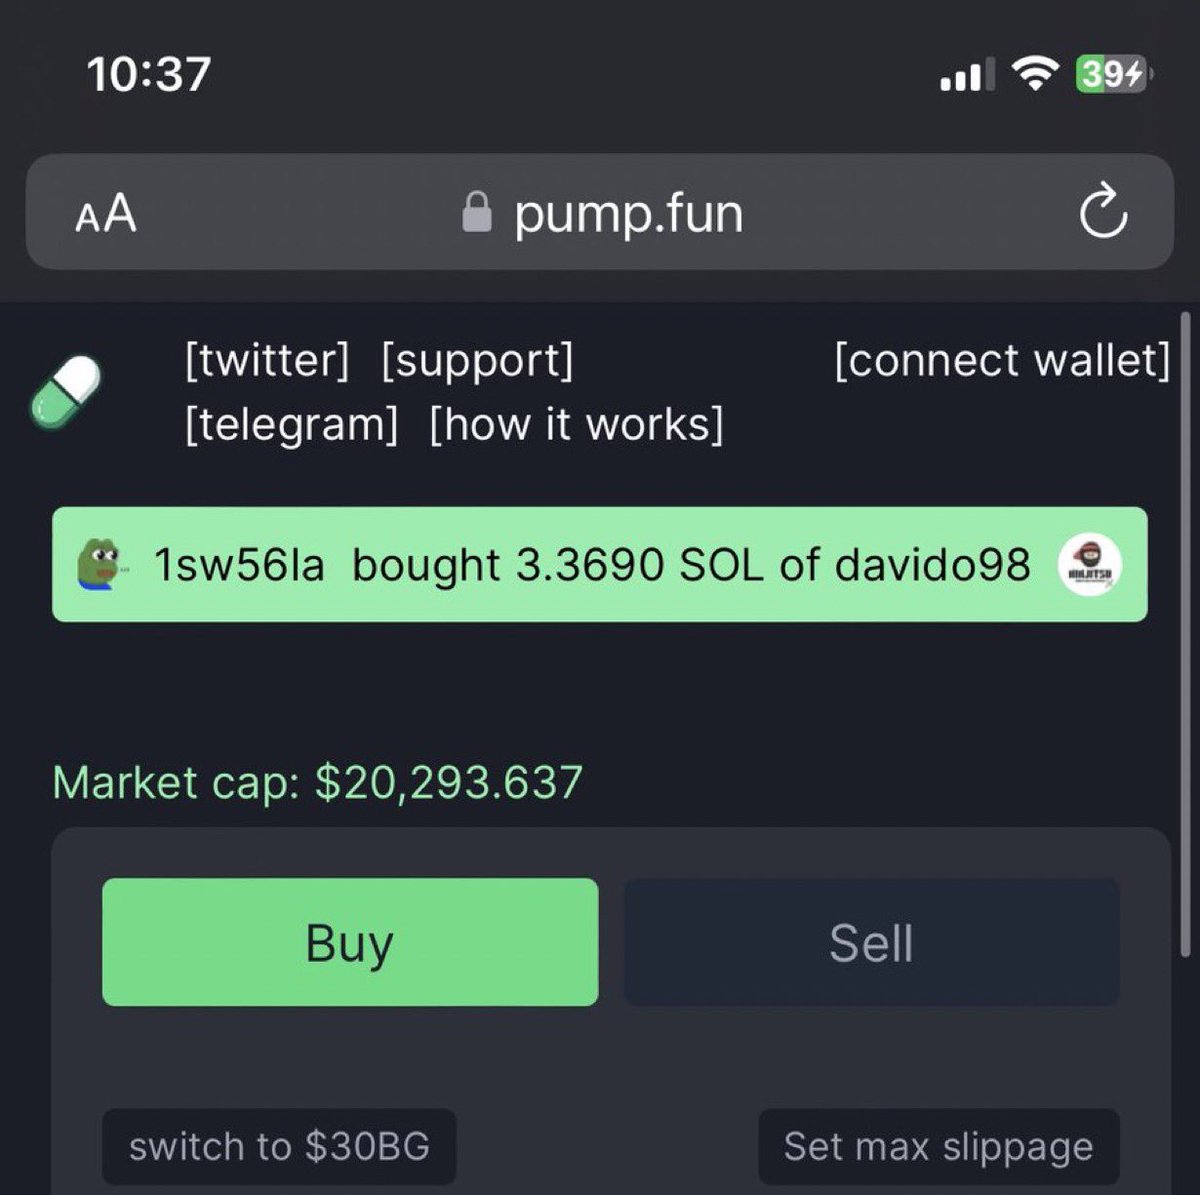 20k MC Am not playing, retweet and drop your sol wallet tag @davido , this shit will do send 🔥 CA : pump.fun/FQecVJNHZm7EPC… Just past the link in your phantom wallet browser, connect and buy and sell , leave a comment